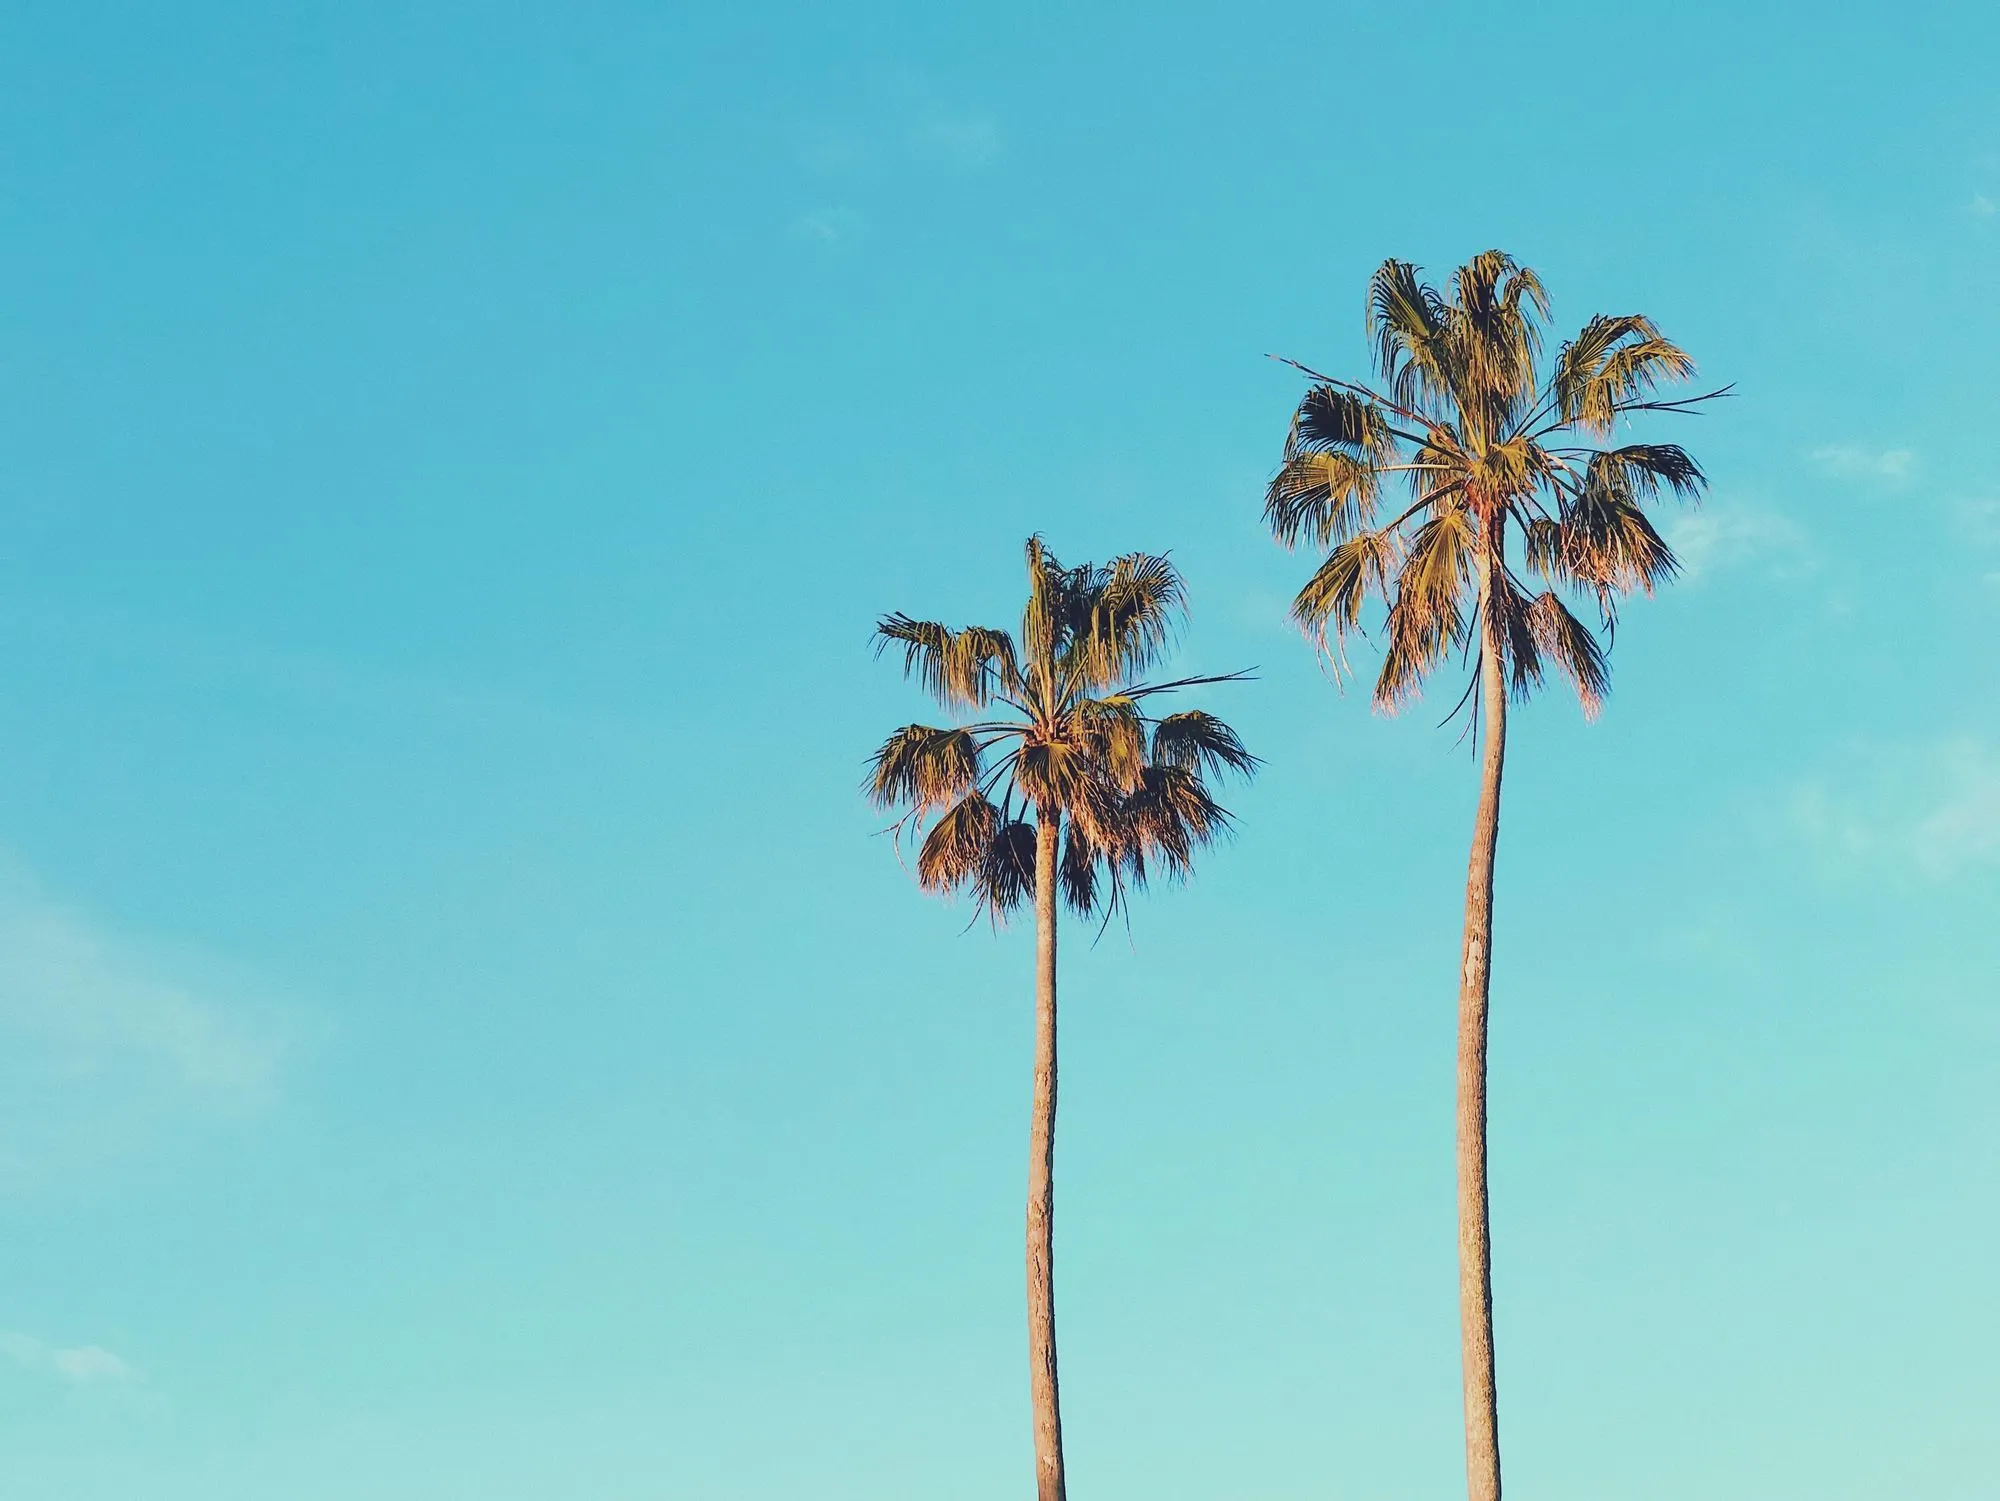 Palm trees together in a row look beautiful.